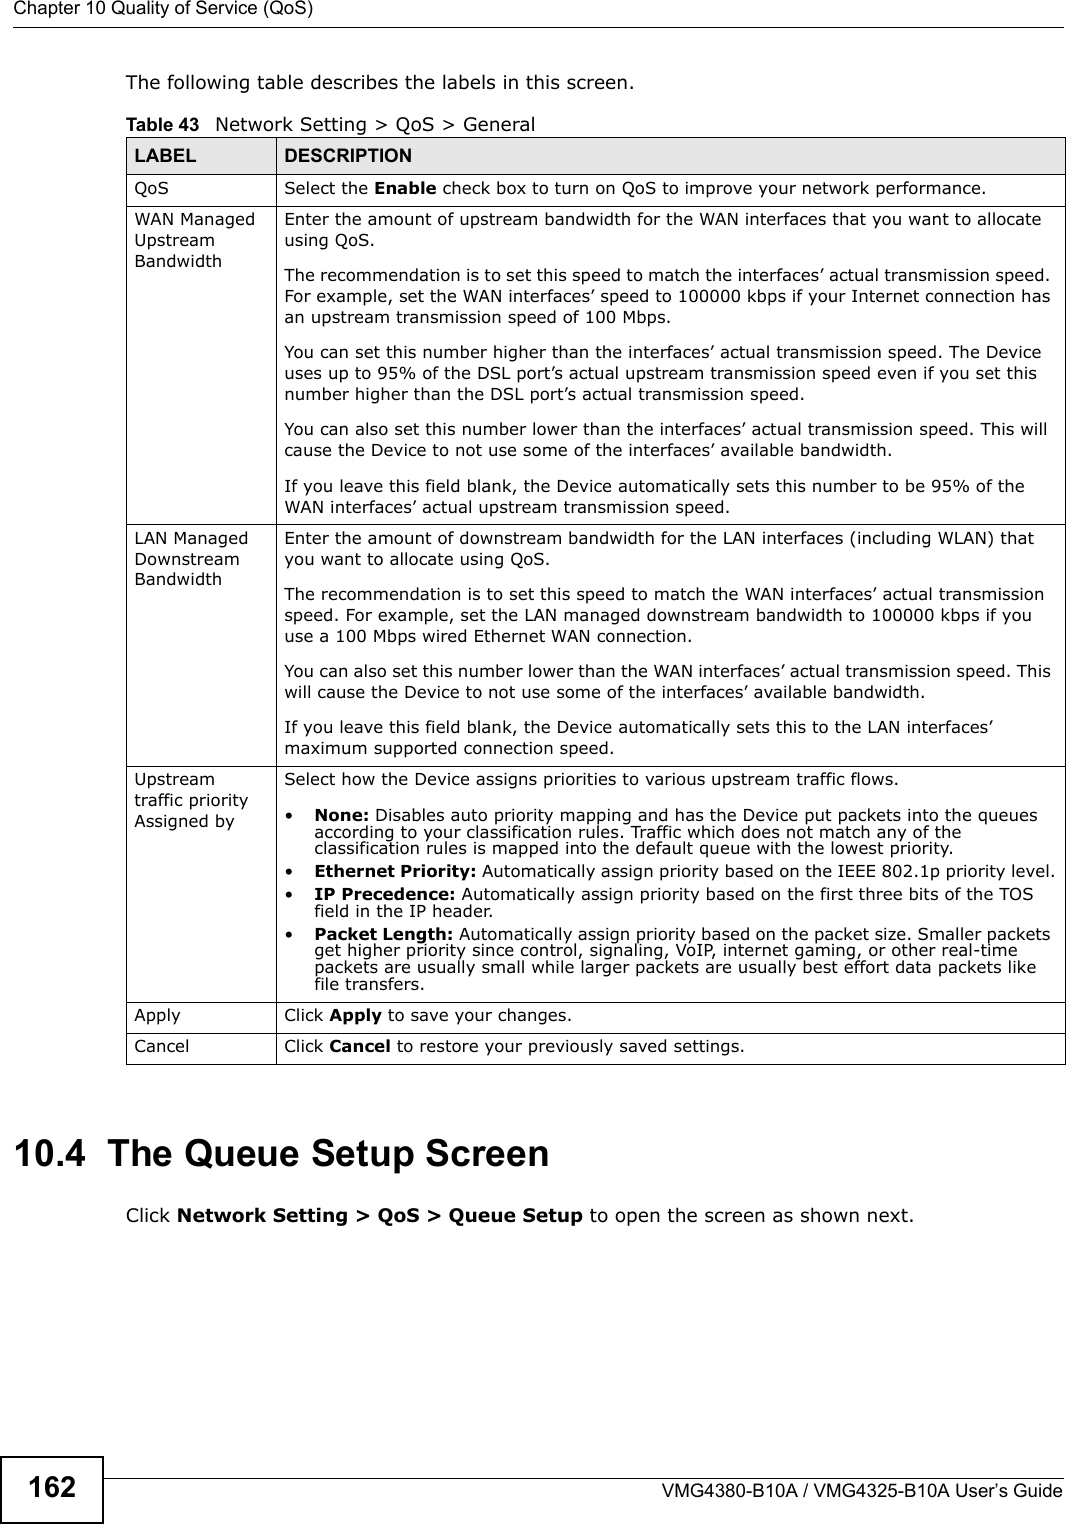 Chapter 10 Quality of Service (QoS)VMG4380-B10A / VMG4325-B10A User’s Guide162The following table describes the labels in this screen. 10.4  The Queue Setup ScreenClick Network Setting &gt; QoS &gt; Queue Setup to open the screen as shown next. Table 43   Network Setting &gt; QoS &gt; GeneralLABEL DESCRIPTIONQoS Select the Enable check box to turn on QoS to improve your network performance. WAN Managed Upstream Bandwidth Enter the amount of upstream bandwidth for the WAN interfaces that you want to allocateusing QoS.The recommendation is to set this speed to match the interfaces’ actual transmission speed.For example, set the WAN interfaces’ speed to 100000 kbps if your Internet connection hasan upstream transmission speed of 100 Mbps.        You can set this number higher than the interfaces’ actual transmission speed. The Deviceuses up to 95% of the DSL port’s actual upstream transmission speed even if you set thisnumber higher than the DSL port’s actual transmission speed.You can also set this number lower than the interfaces’ actual transmission speed. This willcause the Device to not use some of the interfaces’ available bandwidth.If you leave this field blank, the Device automatically sets this number to be 95% of theWAN interfaces’ actual upstream transmission speed.LAN Managed Downstream Bandwidth Enter the amount of downstream bandwidth for the LAN interfaces (including WLAN) thatyou want to allocate using QoS.The recommendation is to set this speed to match the WAN interfaces’ actual transmission speed. For example, set the LAN managed downstream bandwidth to 100000 kbps if you use a 100 Mbps wired Ethernet WAN connection.        You can also set this number lower than the WAN interfaces’ actual transmission speed. Thiswill cause the Device to not use some of the interfaces’ available bandwidth.If you leave this field blank, the Device automatically sets this to the LAN interfaces’maximum supported connection speed.Upstream traffic priorityAssigned bySelect how the Device assigns priorities to various upstream traffic flows.•None: Disables auto priority mapping and has the Device put packets into the queuesaccording to your classification rules. Traffic which does not match any of theclassification rules is mapped into the default queue with the lowest priority.•Ethernet Priority: Automatically assign priority based on the IEEE 802.1p priority level.•IP Precedence: Automatically assign priority based on the first three bits of the TOS field in the IP header.•Packet Length: Automatically assign priority based on the packet size. Smaller packets get higher priority since control, signaling, VoIP, internet gaming, or other real-time packets are usually small while larger packets are usually best effort data packets like file transfers.Apply Click Apply to save your changes.Cancel Click Cancel to restore your previously saved settings.